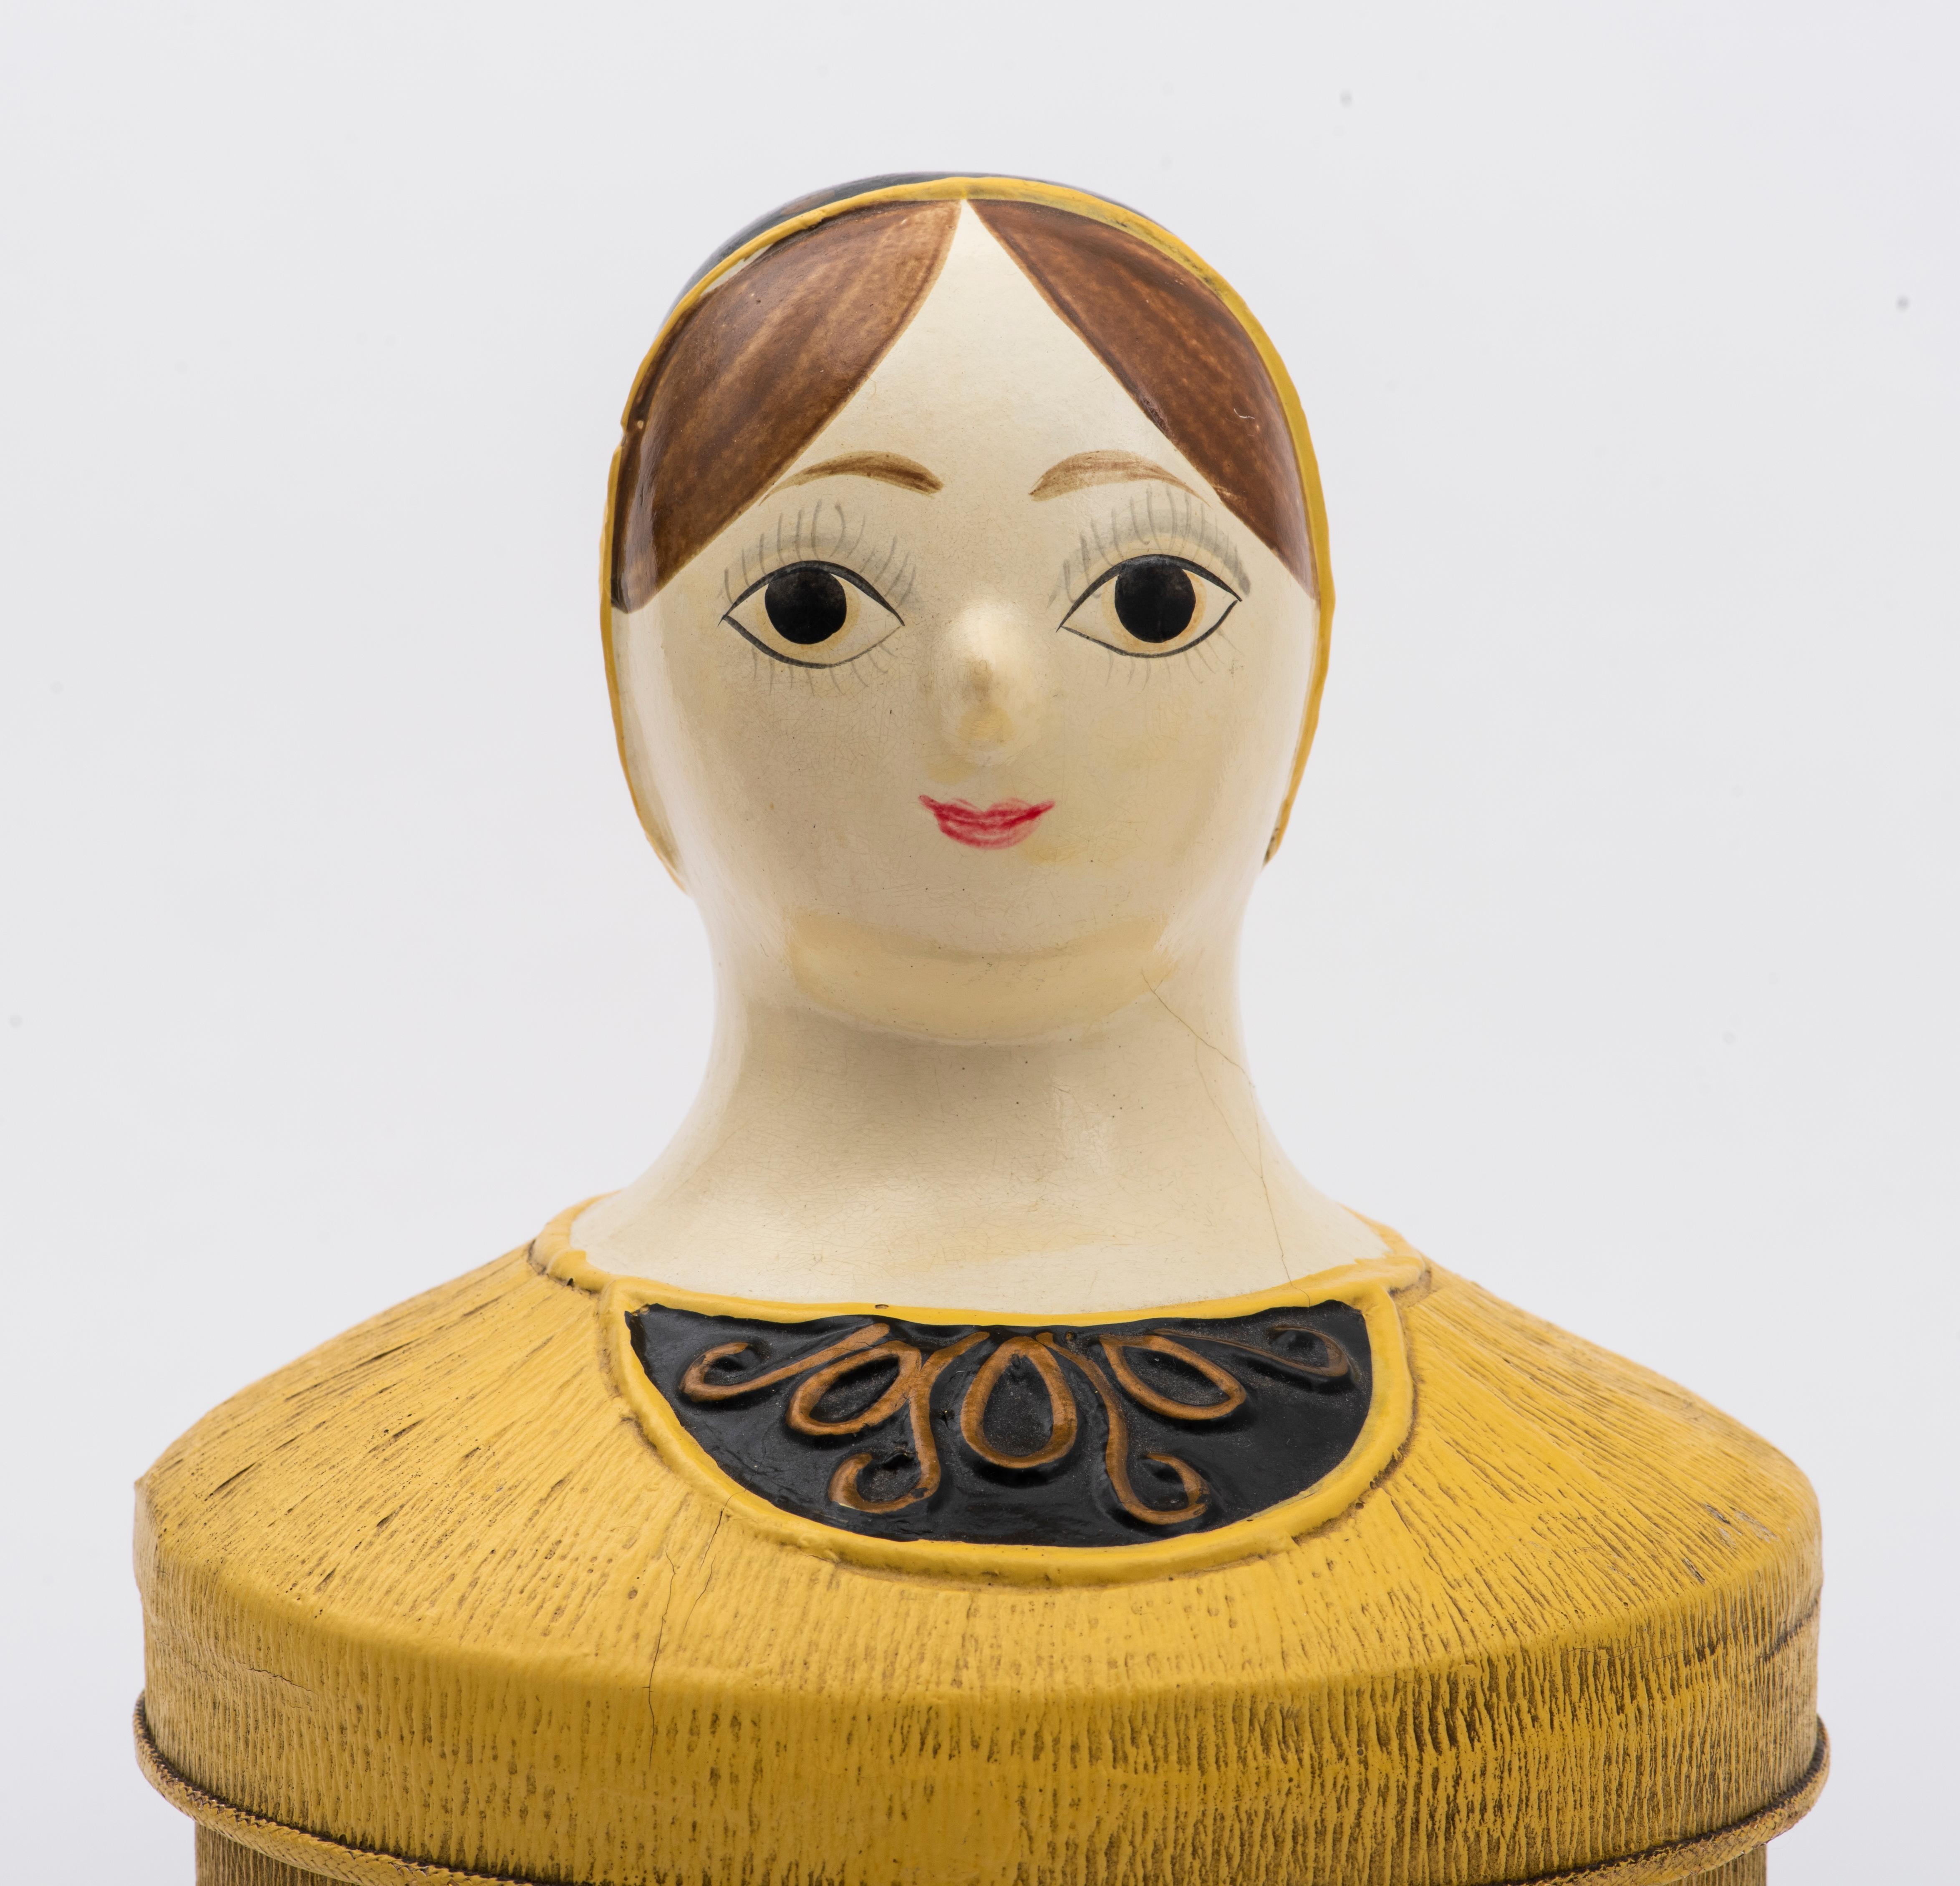 20th Century Vintage Paper Mache Doll Decorative Box, Made by I.W. Rice & Co., Made in Japan